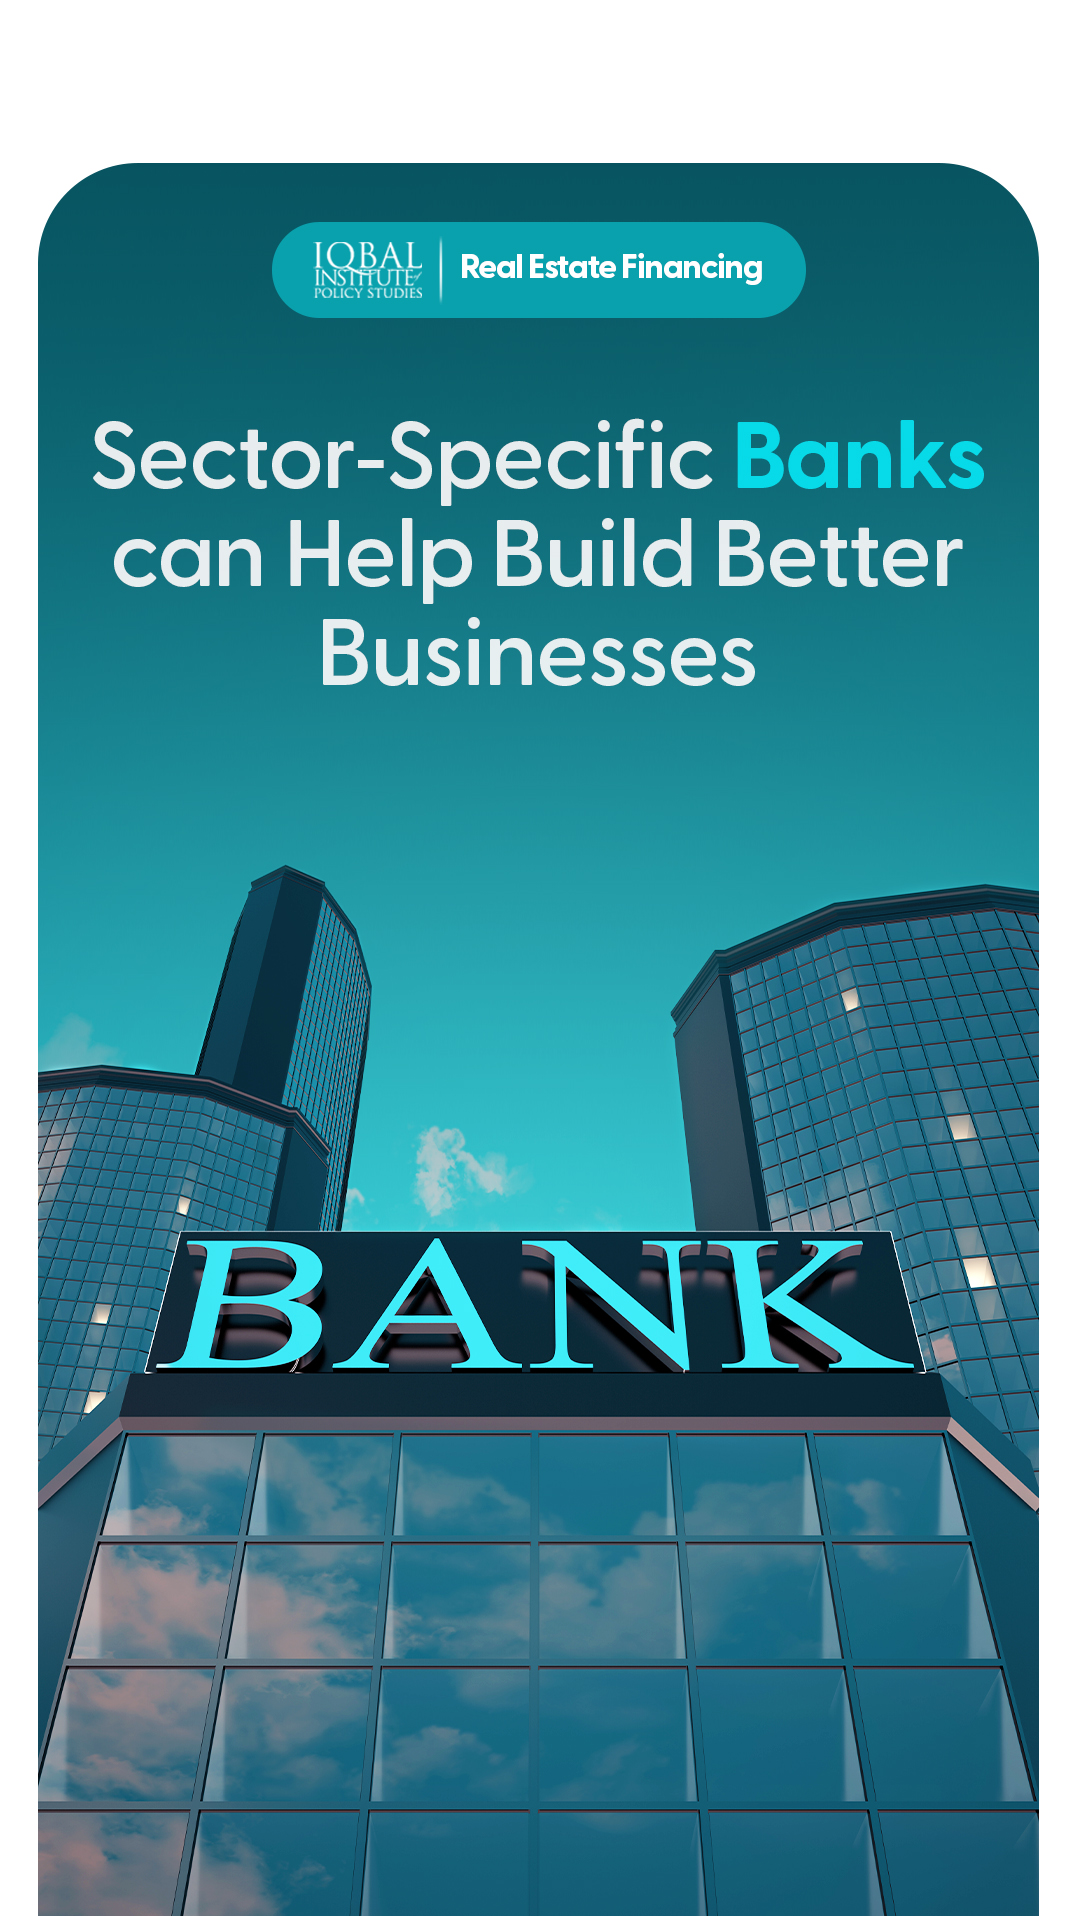 sector-specific Banks can help build better businesses